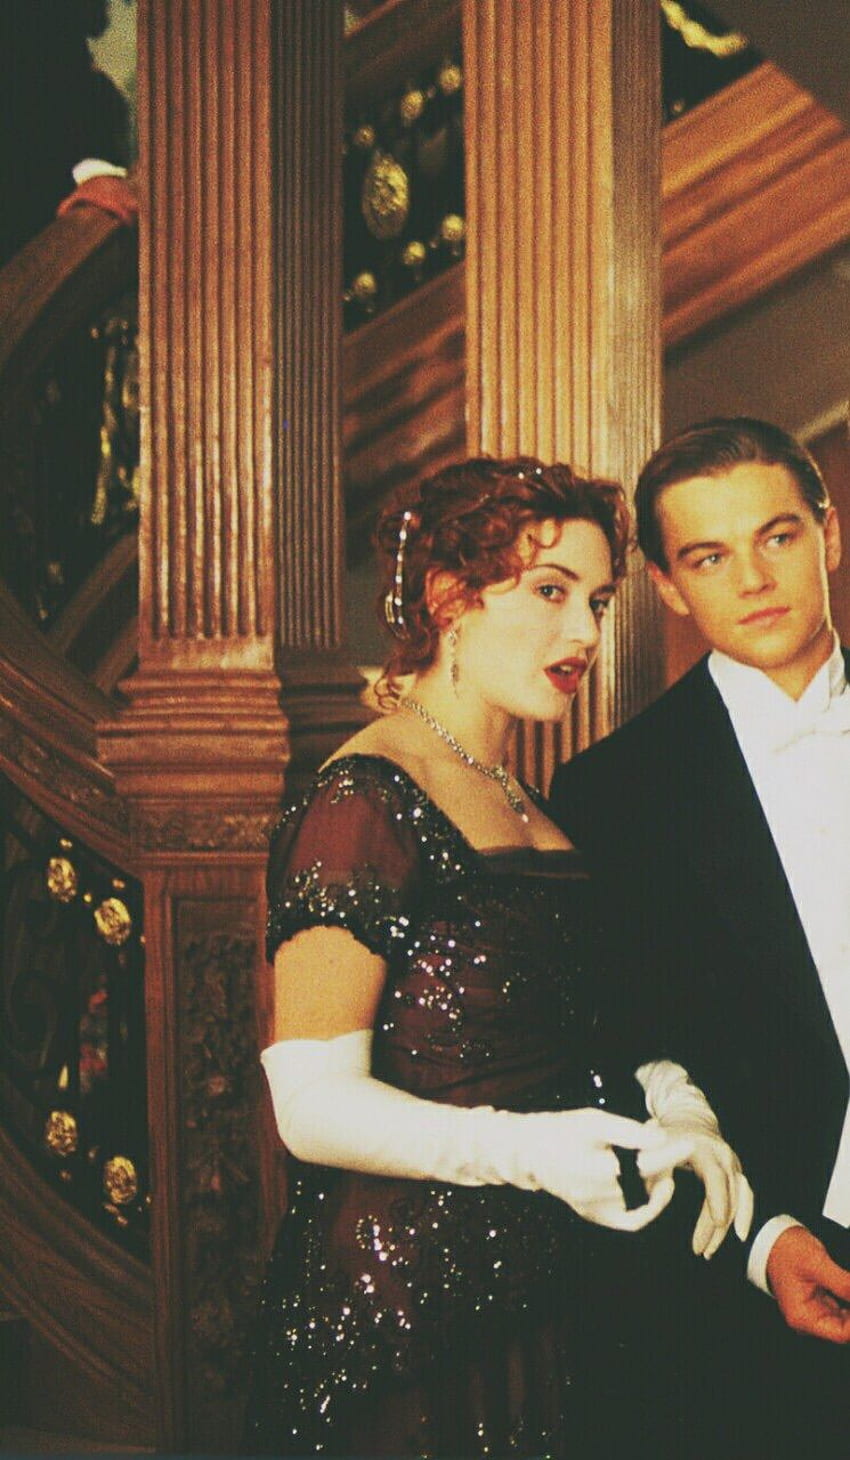 Titanic – could Jack have survived with Rose?